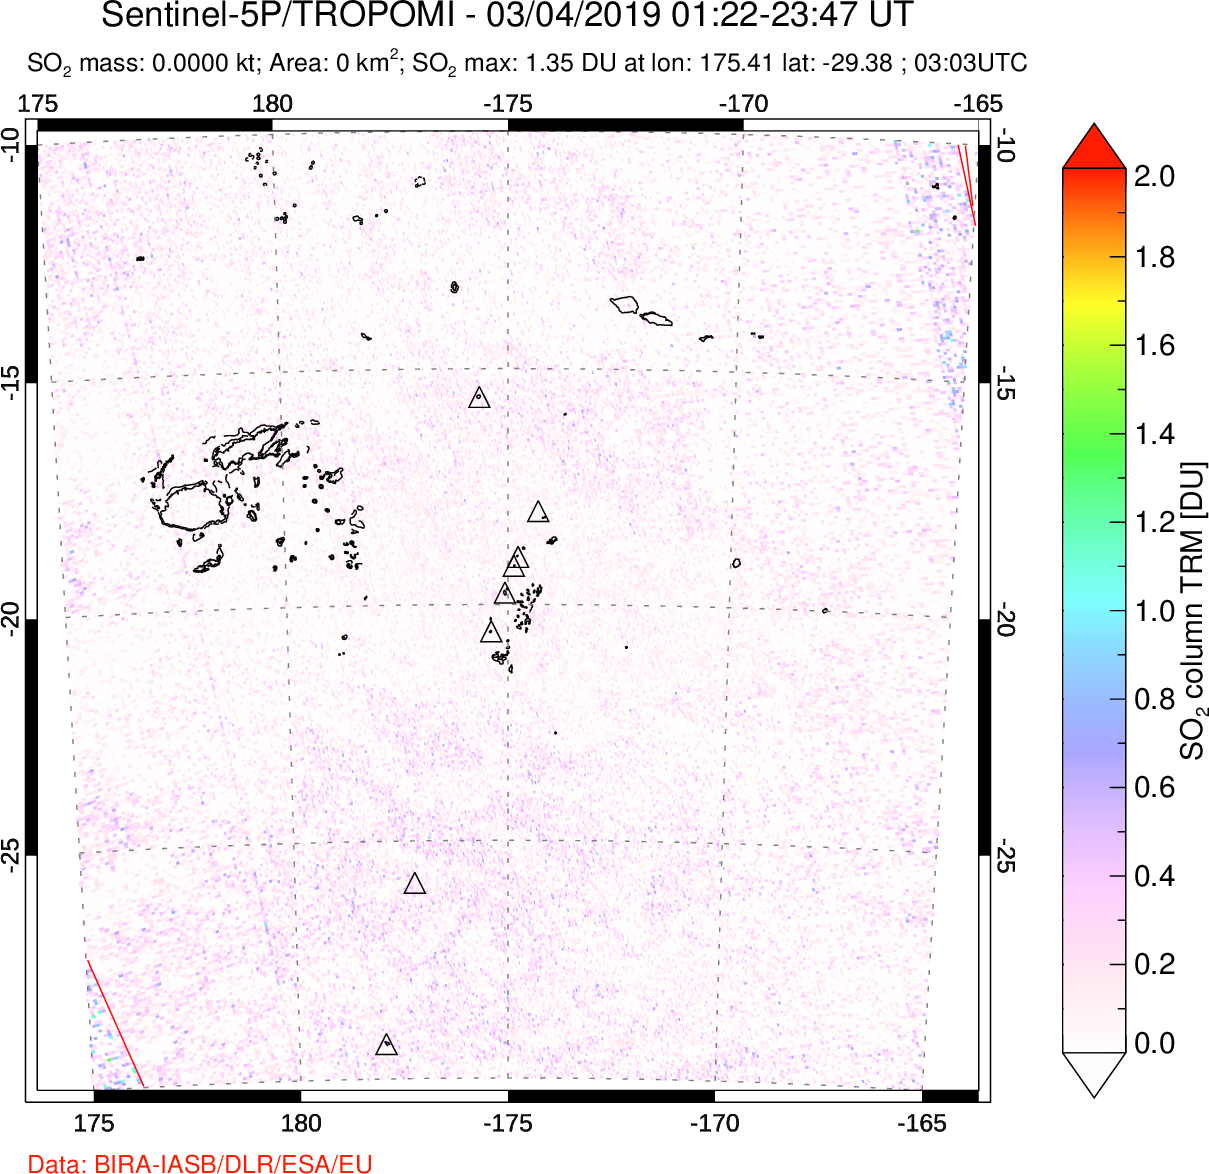 A sulfur dioxide image over Tonga, South Pacific on Mar 04, 2019.